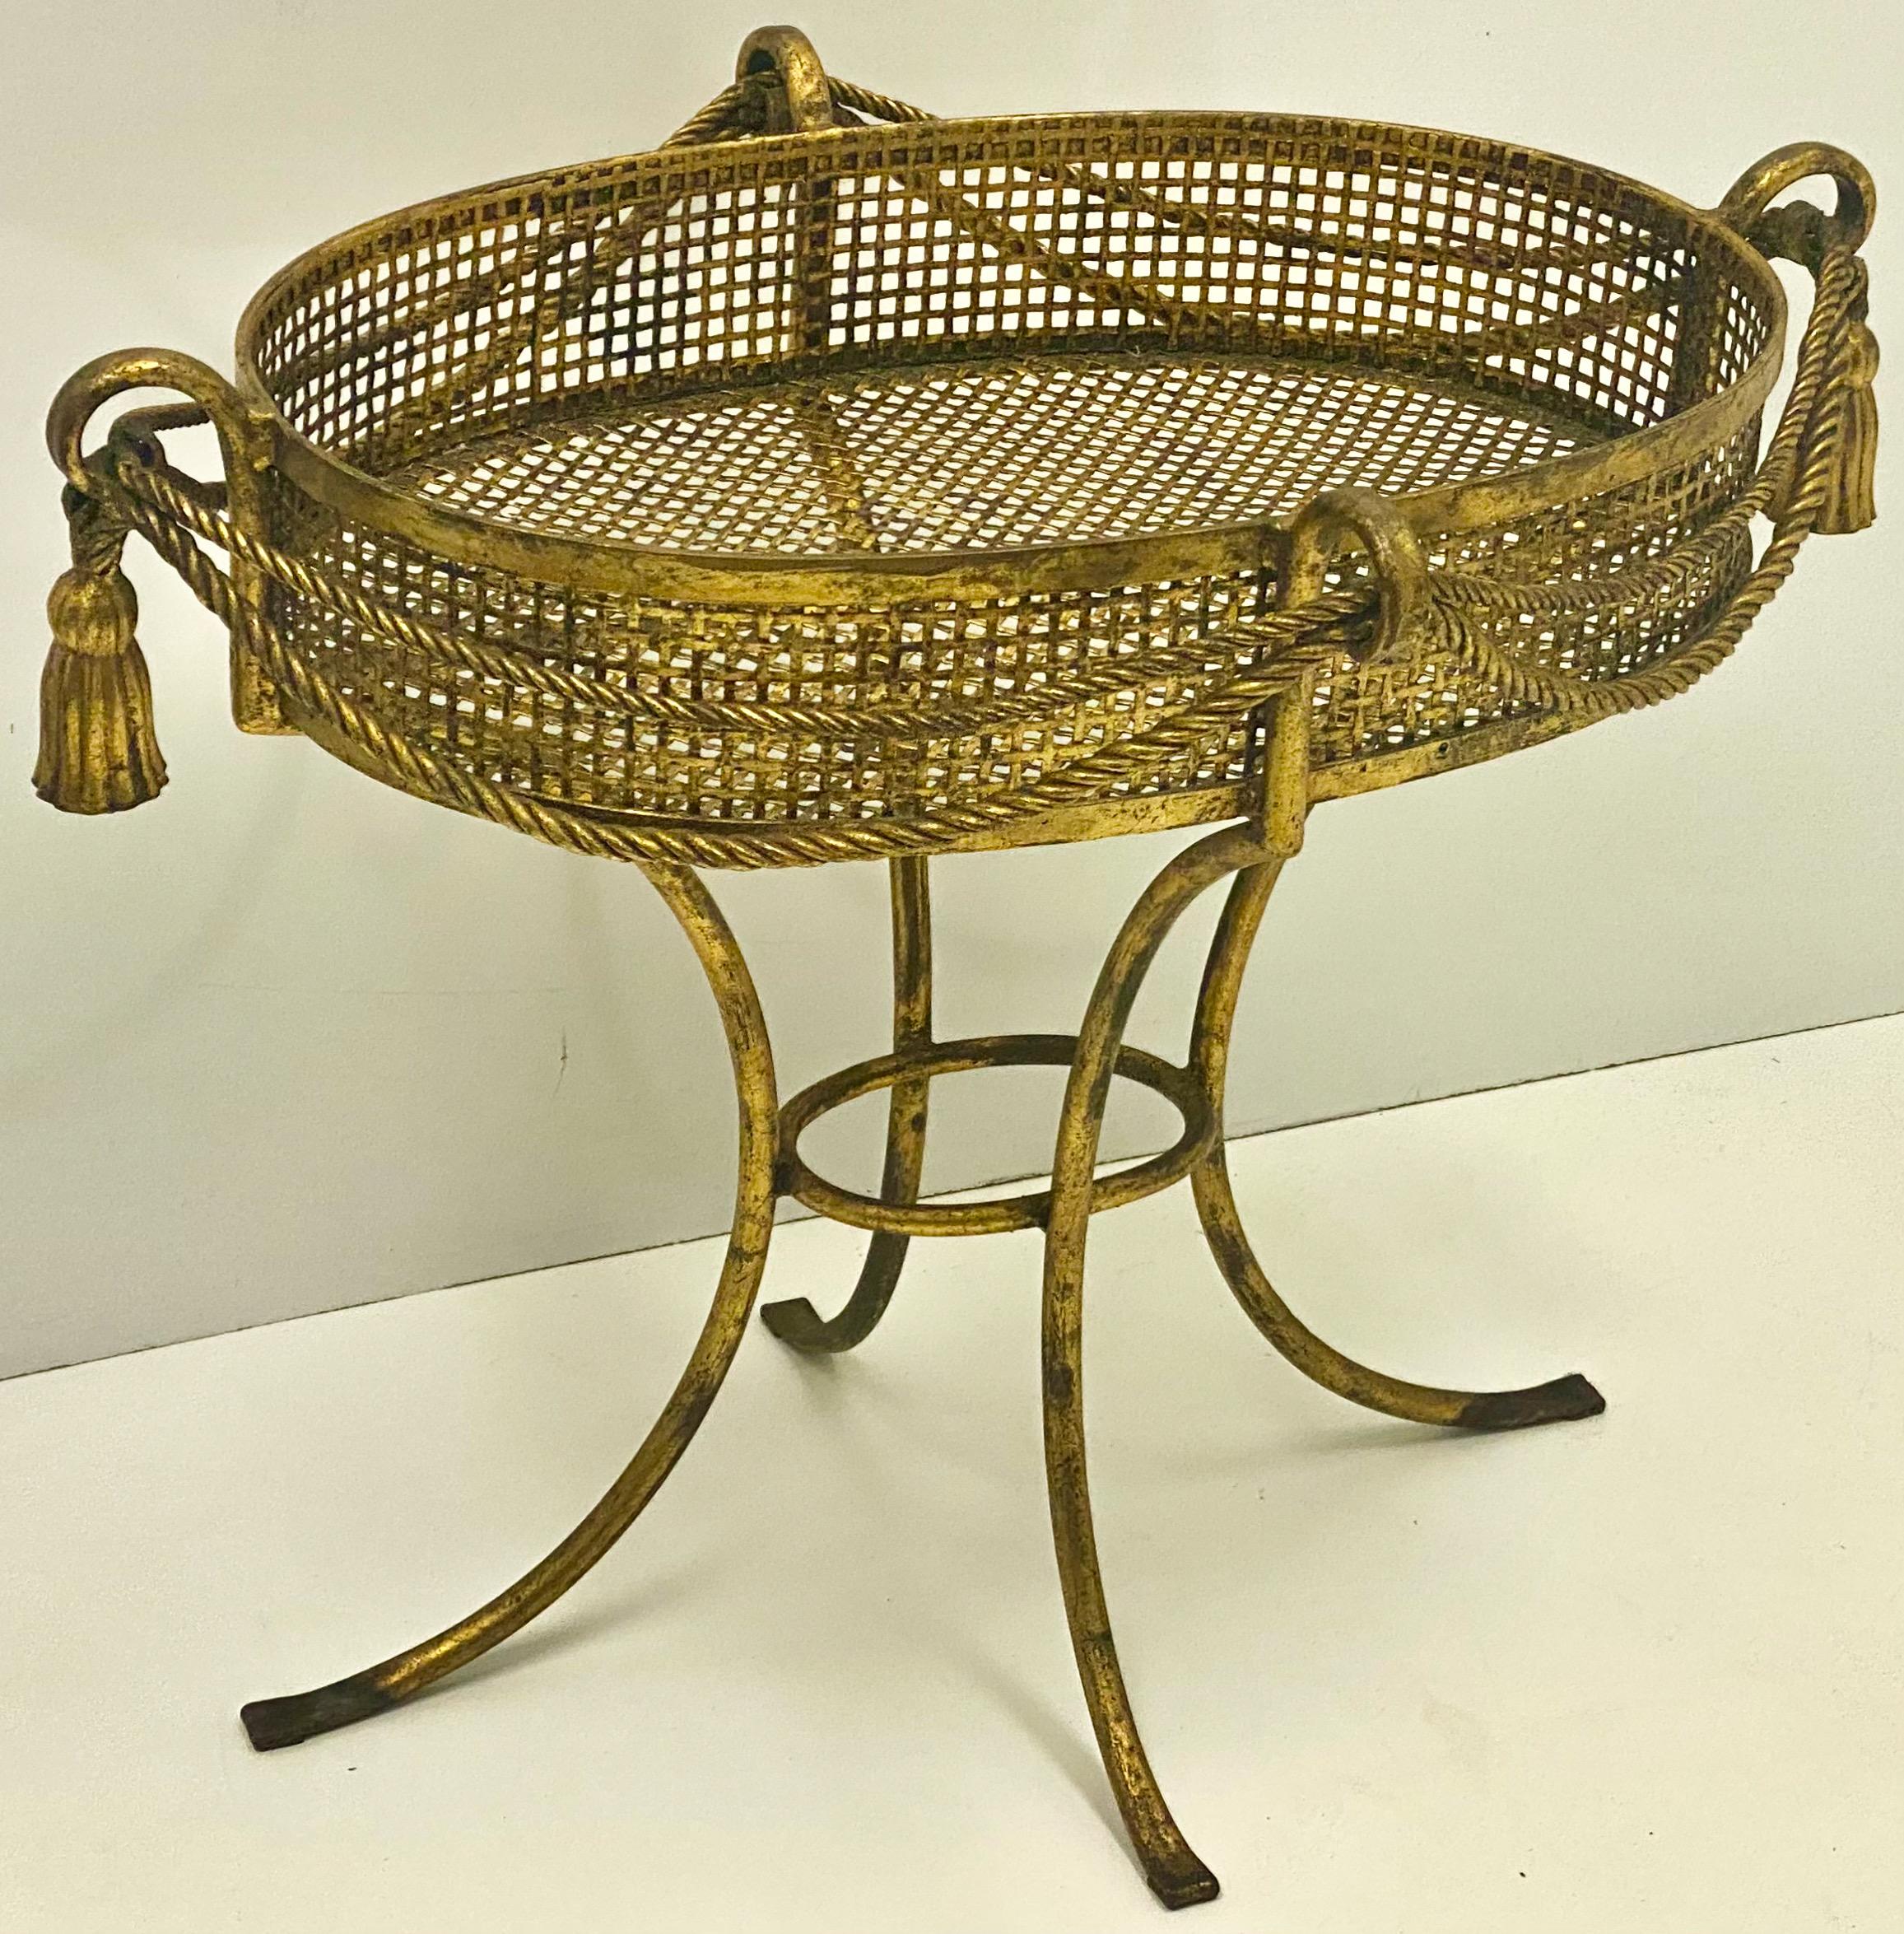 This is a large scale Italian Hollywood Regency gilt tassel planter. This is a fun piece as we approach spring. It is all original with age appropriate wear.